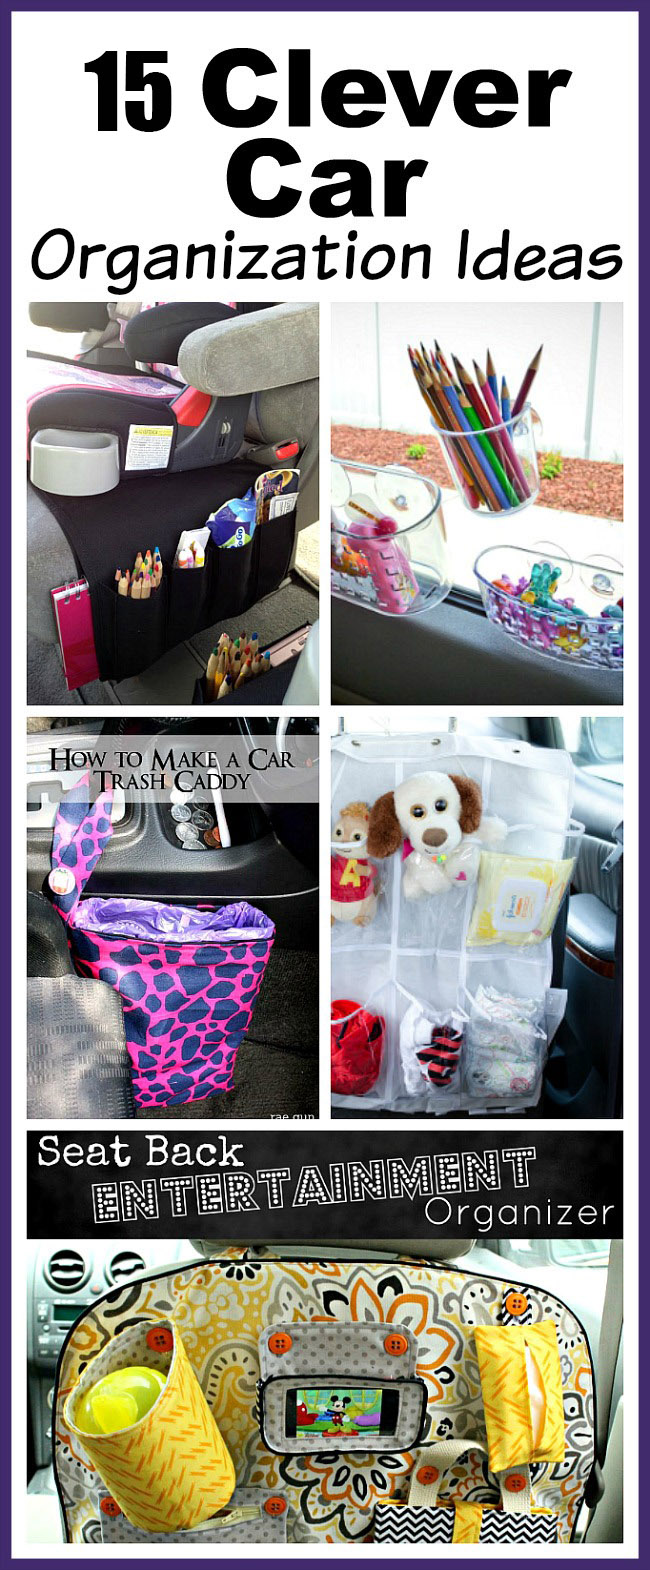 15 Clever Car Organization Ideas- You don't need to buy any fancy organizers to keep your car neat! Here are 10 clever (and inexpensive) car organization ideas! | car organizer, kids car organization ideas, backseat organizer, seat back organizer, DIY organization, easy organization, vehicle organizer, DIY car trash can, how to organize your car #organizingTips #carOrganization #organize #organization #ACultivatedNest